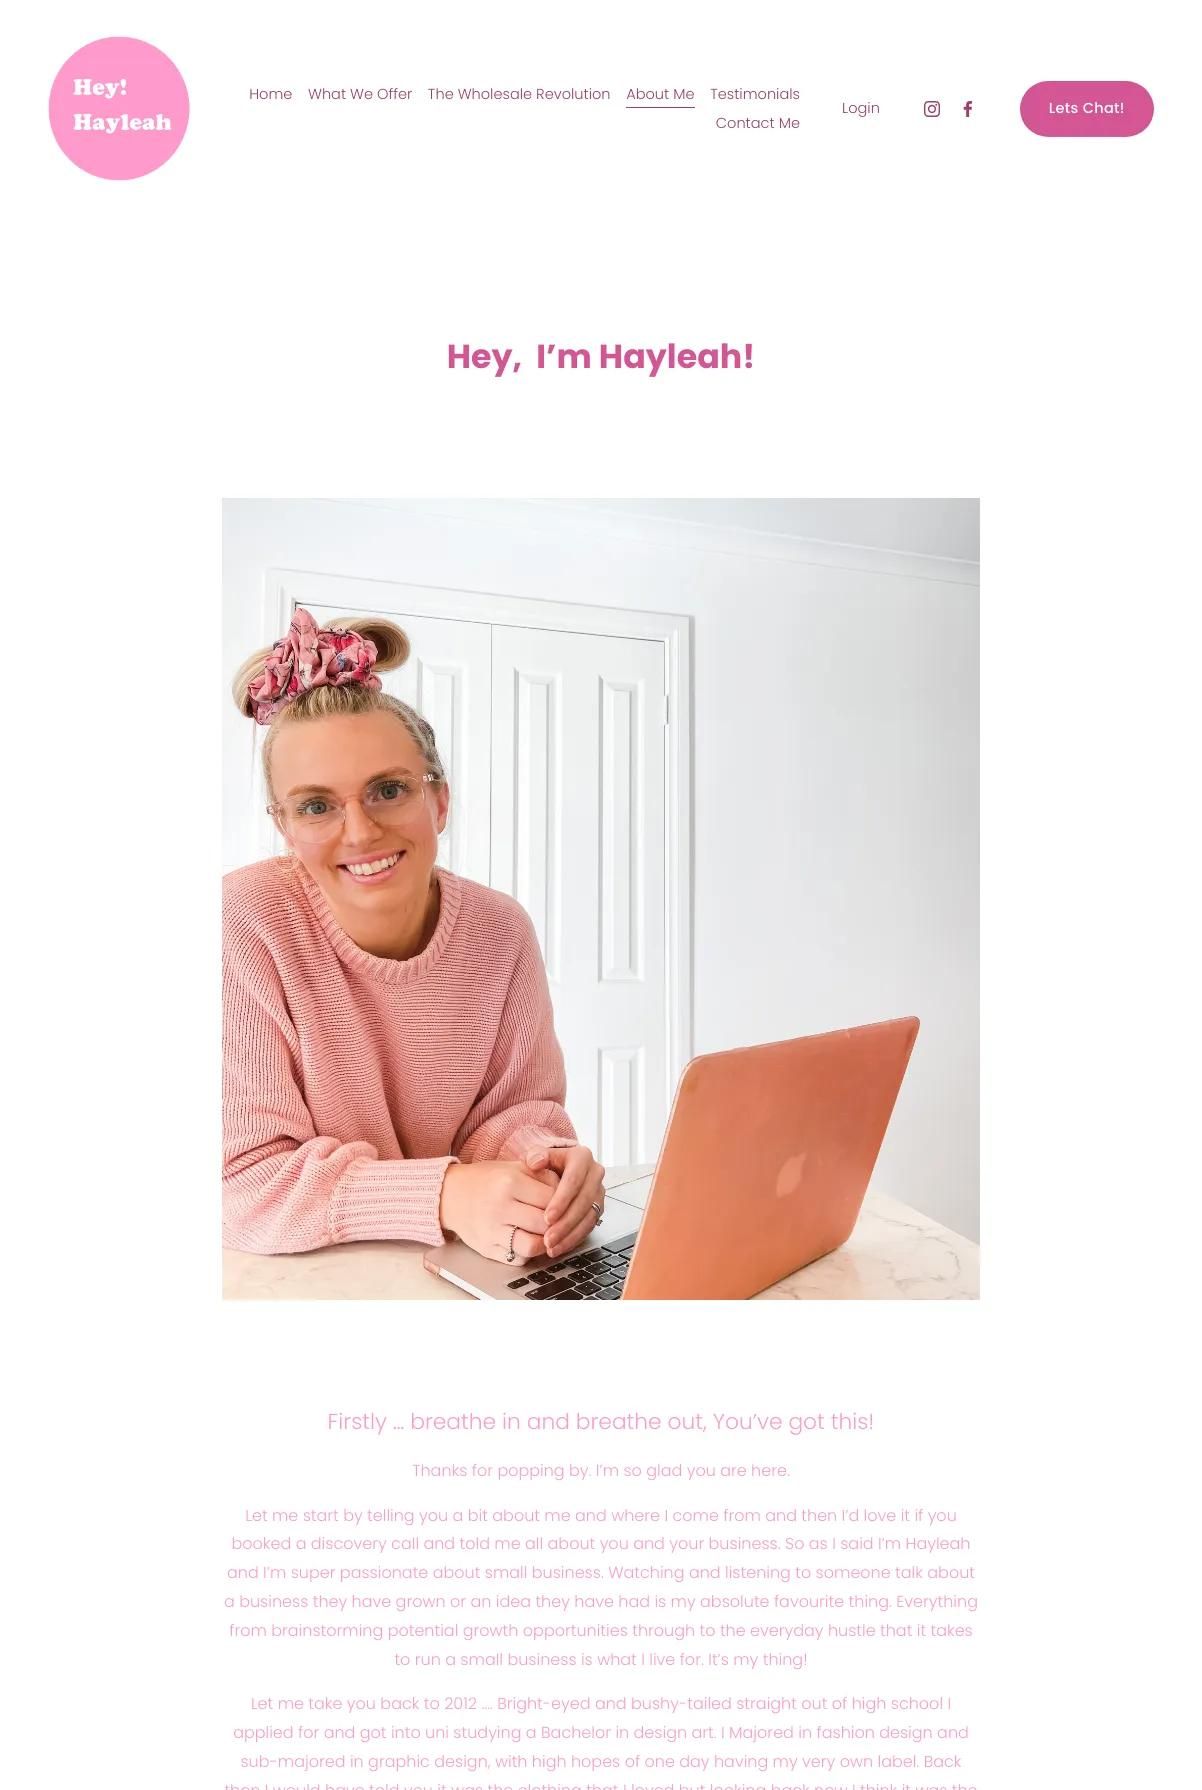 Screenshot 3 of Hey Hayleah (Example Squarespace Virtual Assistant Website)